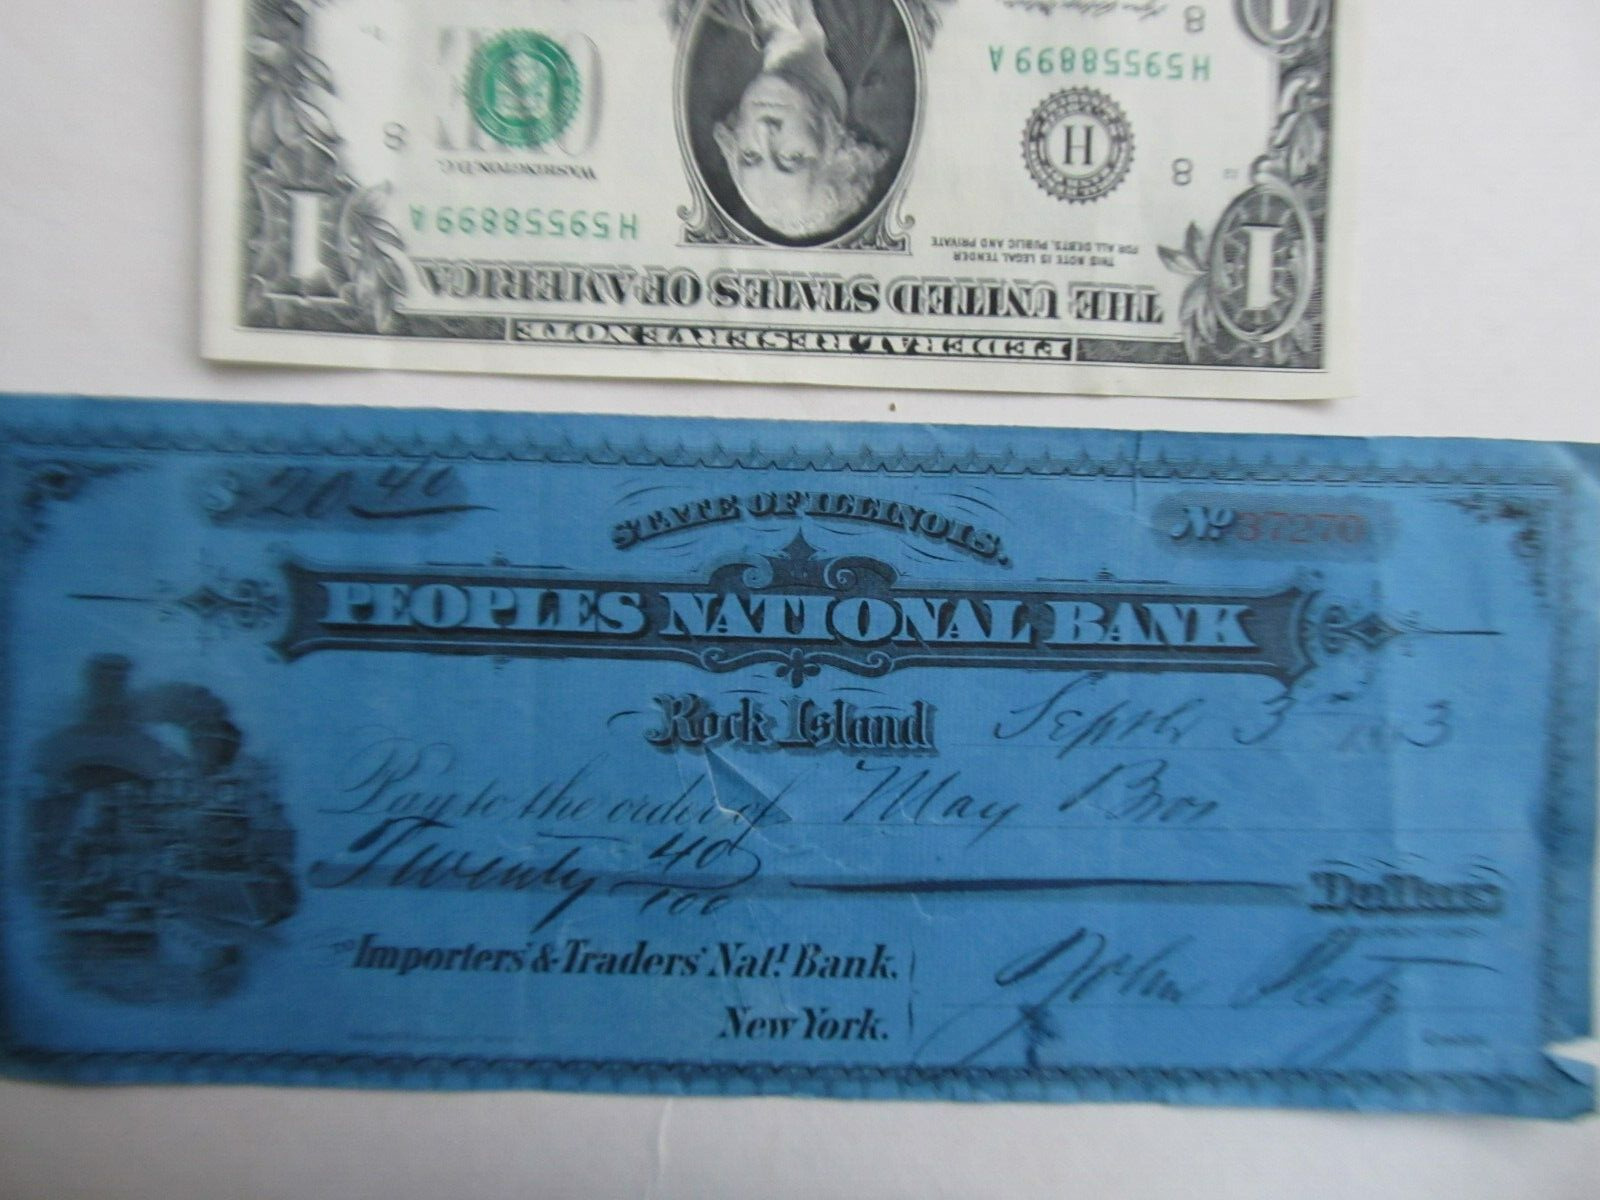 Illinois 1883 Note, People's National Bank, Rock Island, Railroad, Glass Works